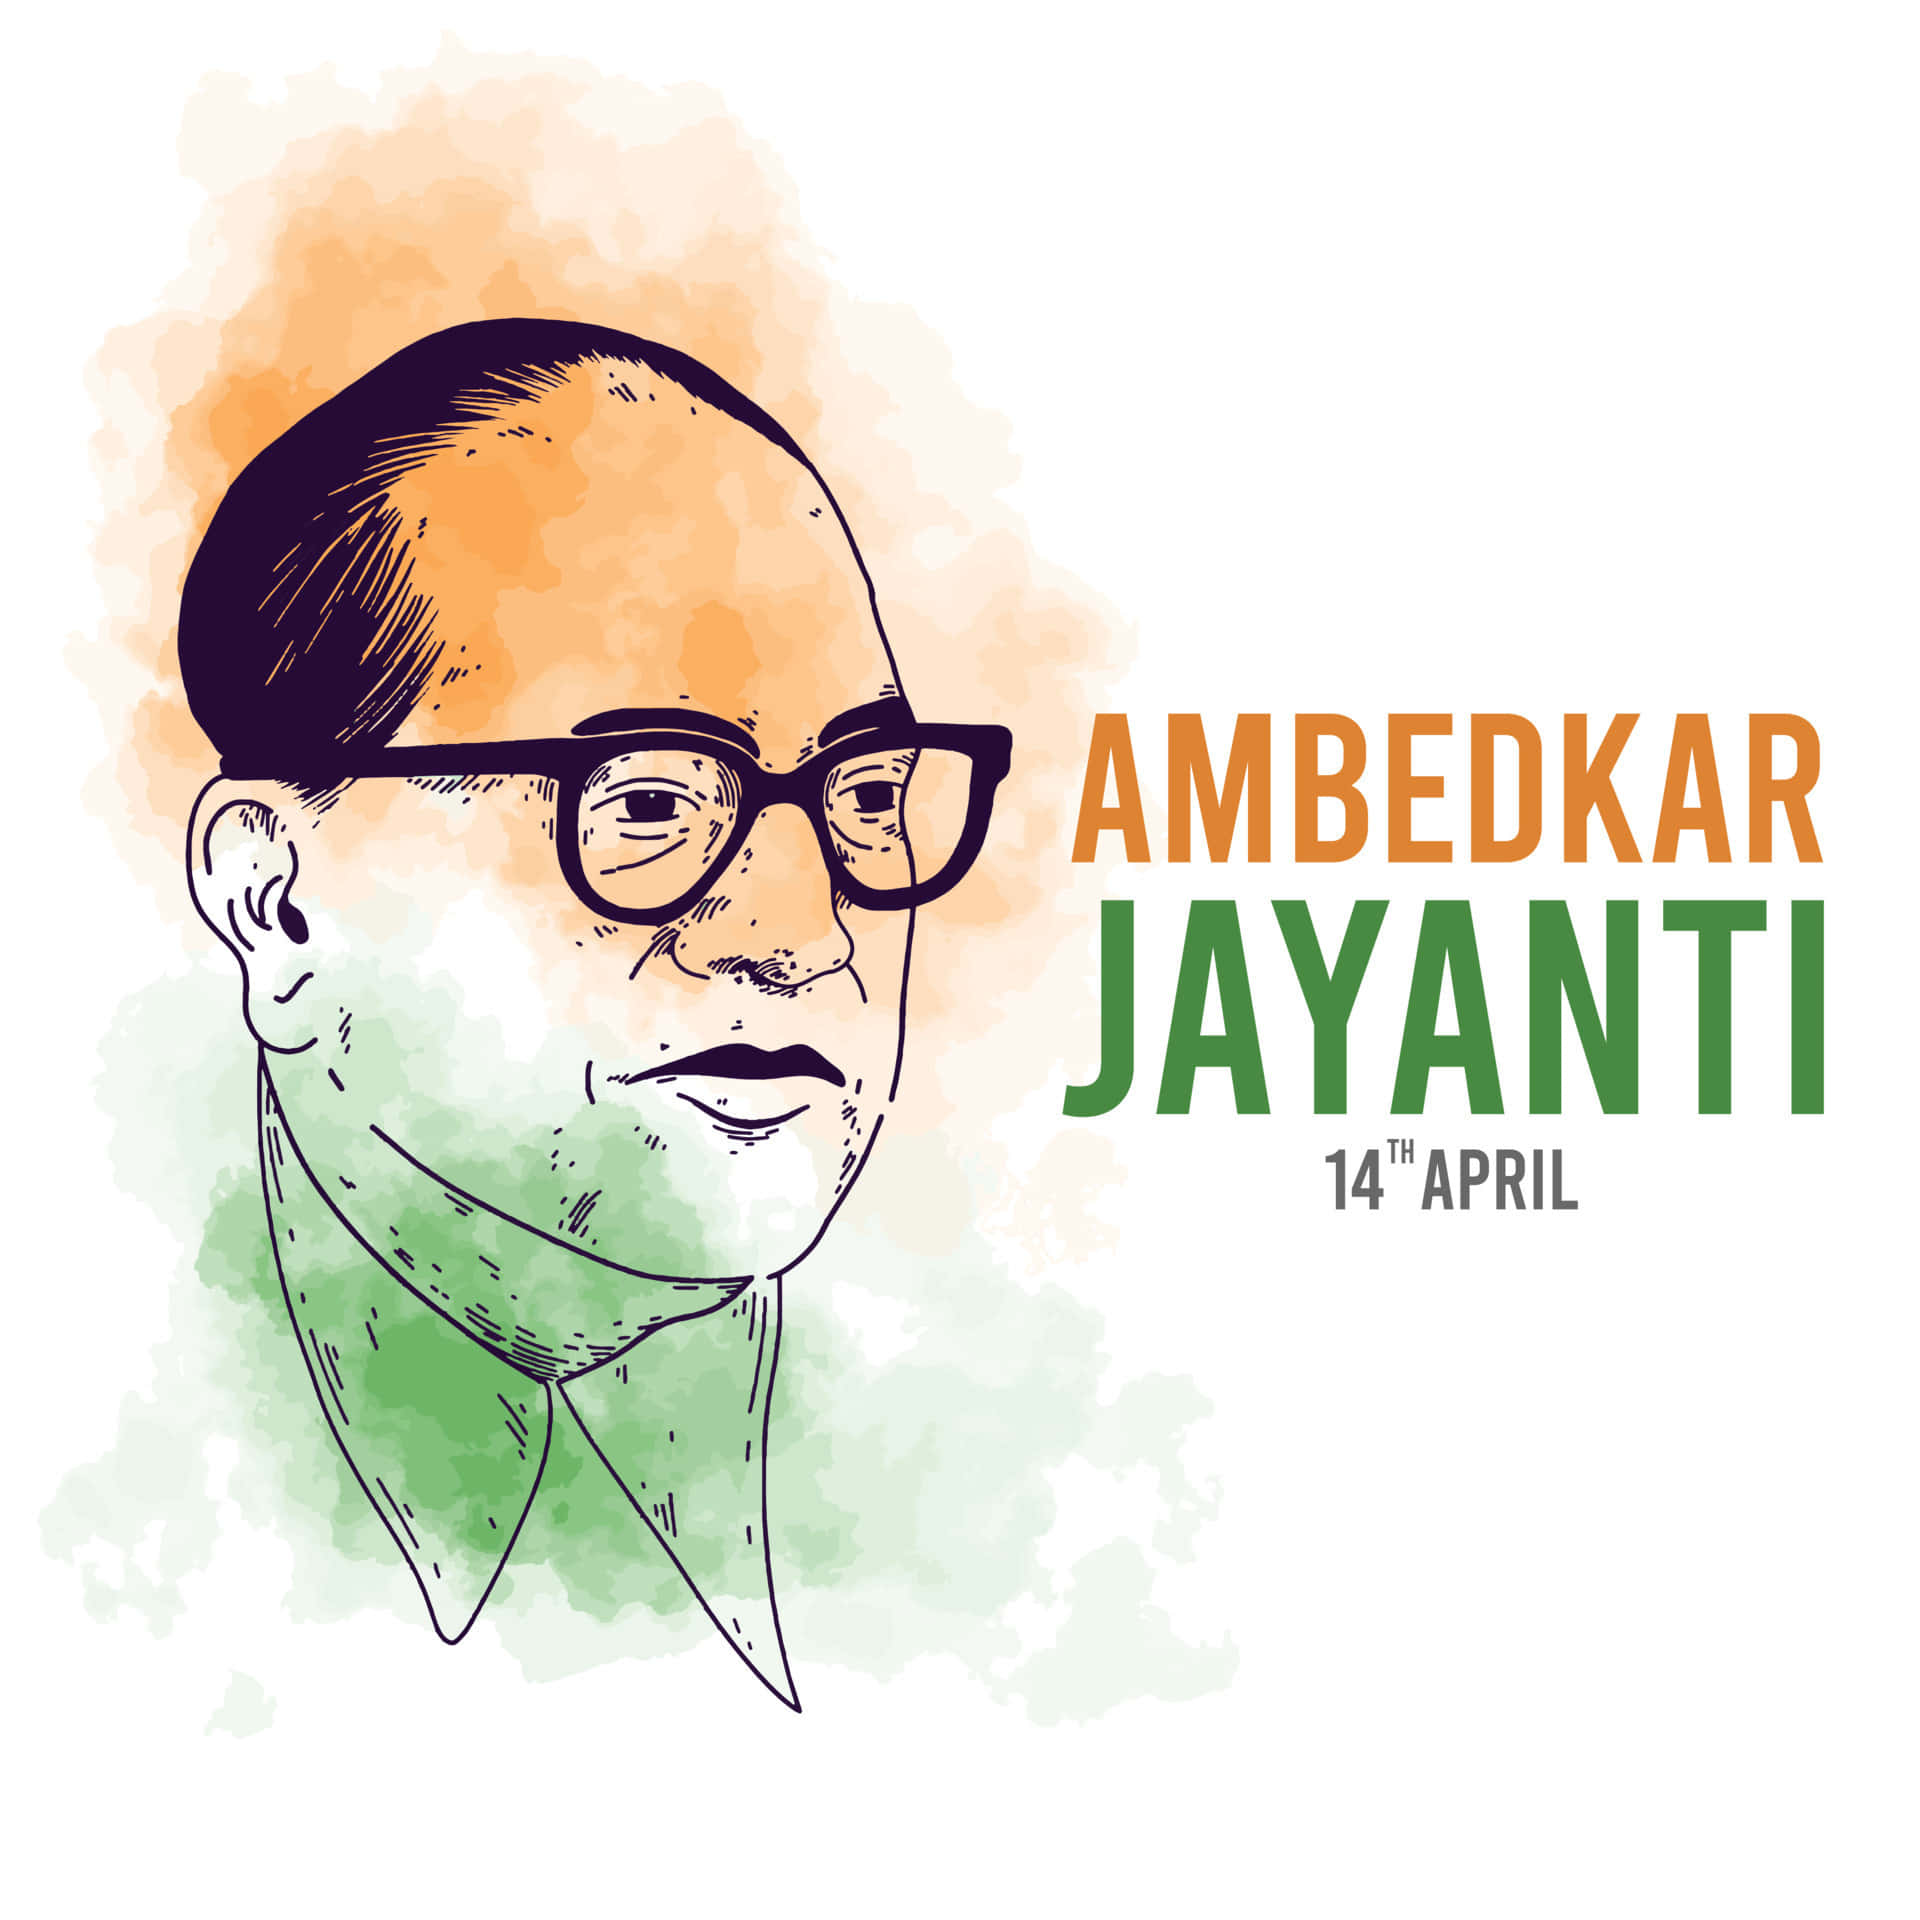 Dr. B.R. Ambedkar - The Architect of the Indian Constitution